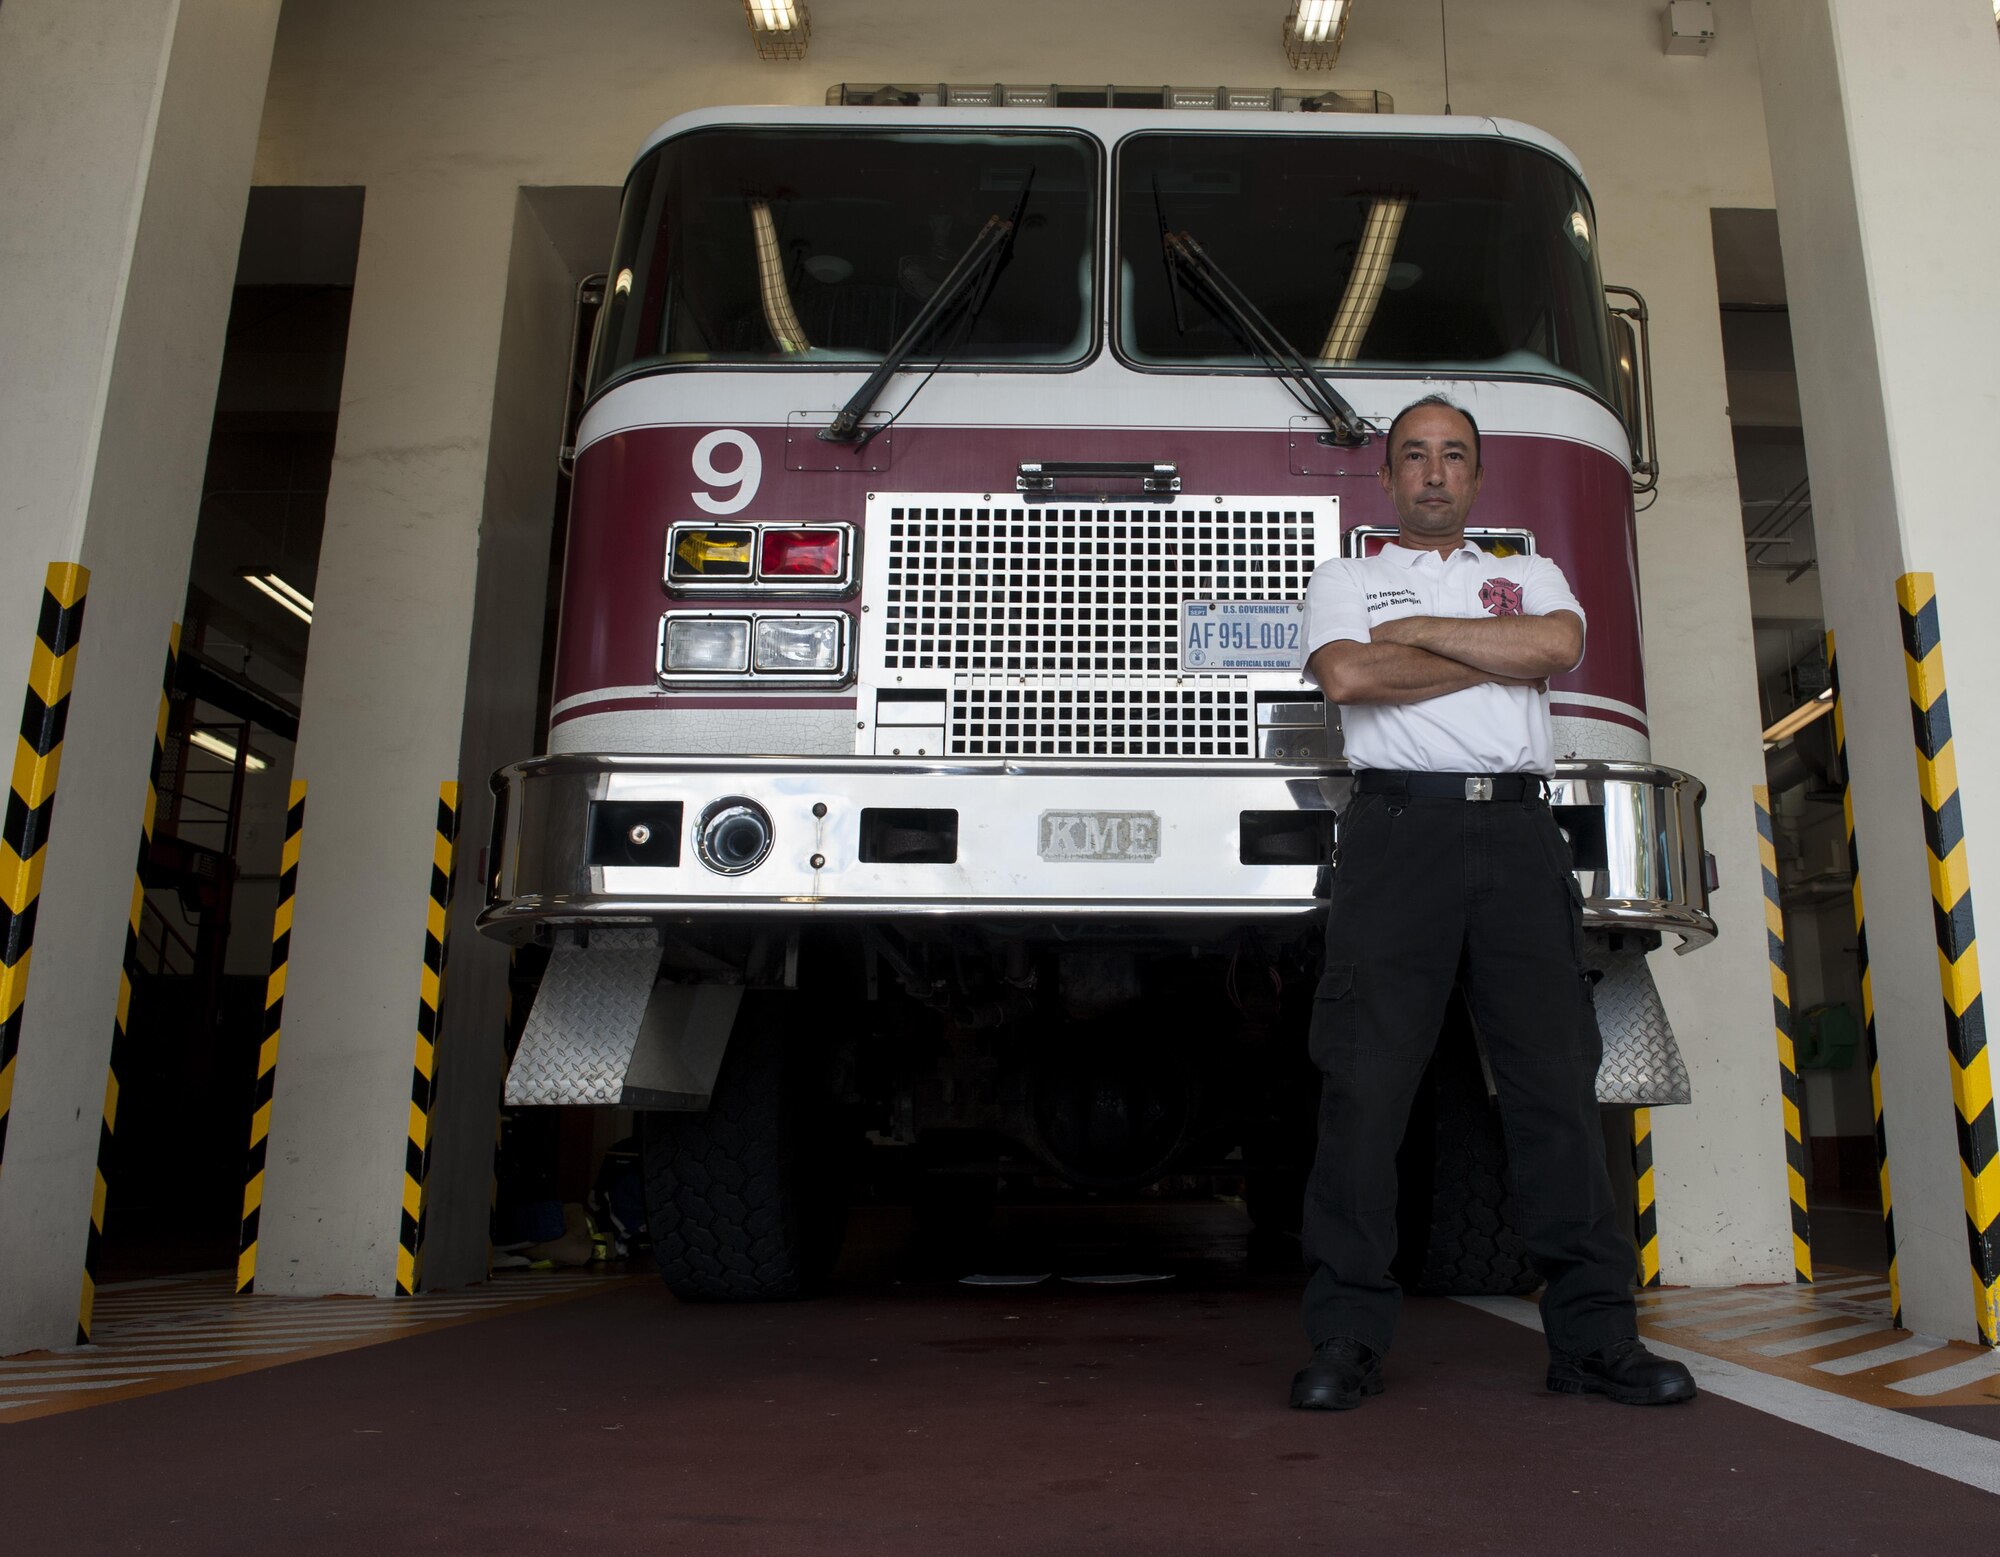 Kenichi Shimajiri, 18th Civil Engineer Squadron fire inspector, stands in front of a fire truck July 27, 2016, at Kadena Air Base, Japan. Shimajiri was a firefighter for 23 years at Kadena before becoming a fire inspector. As a fire inspector, Shimajiri is responsible for ensuring buildings are free of fire hazards. (U.S. Air Force photo by Airman 1st Class Lynette M. Rolen)